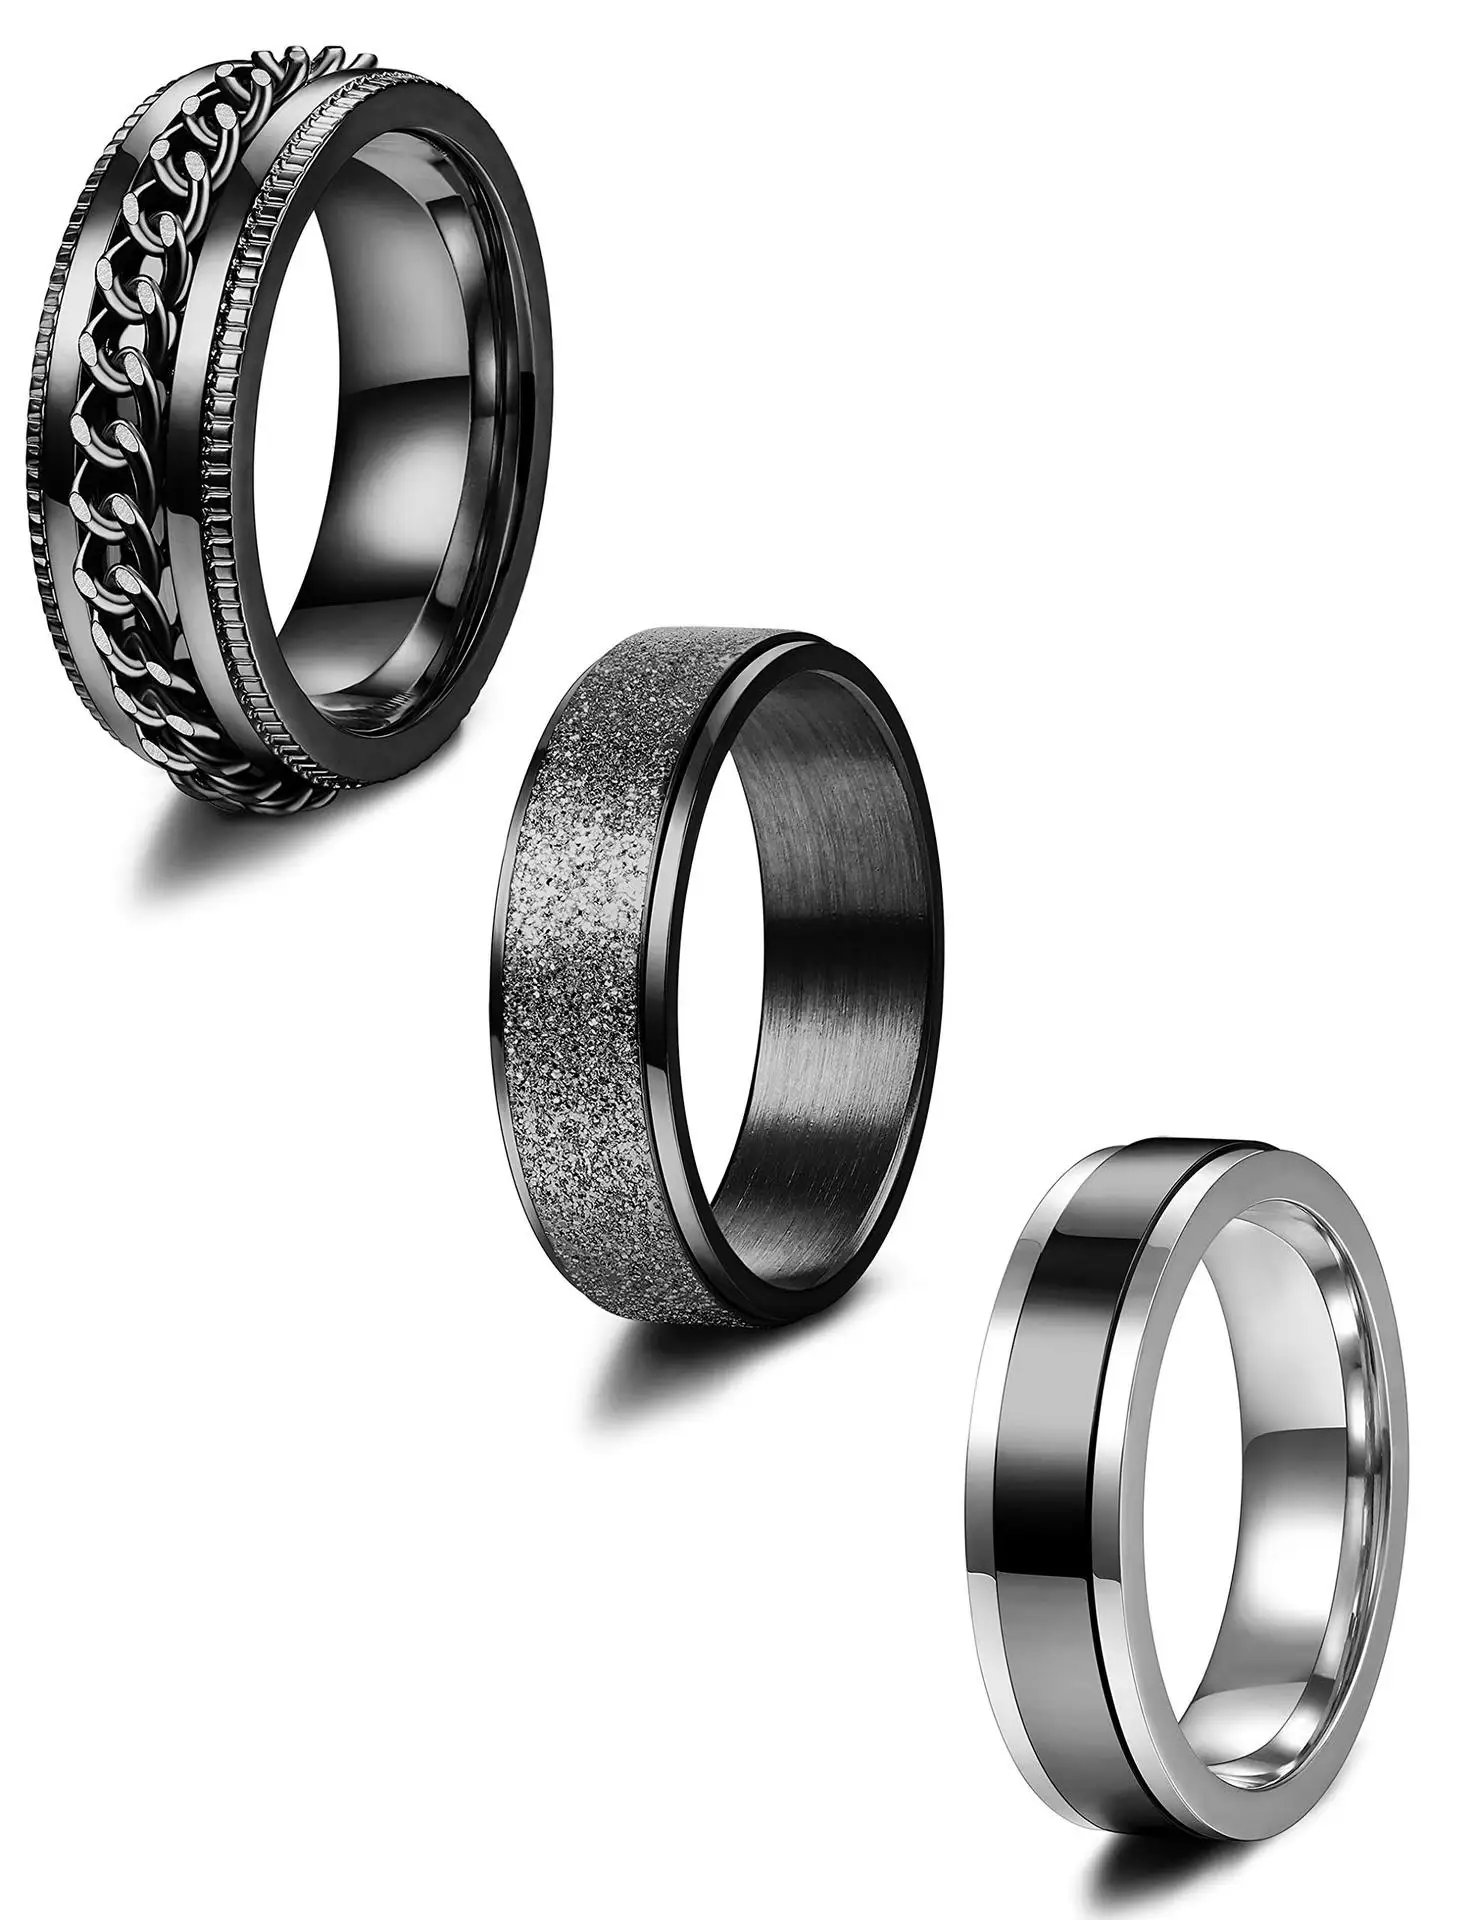 

Megin D Stainless Steel Titanium Chains Vintage Spinning Rotatable Rings Set for Women Men Couple Friends Gift Fashion Jewelry